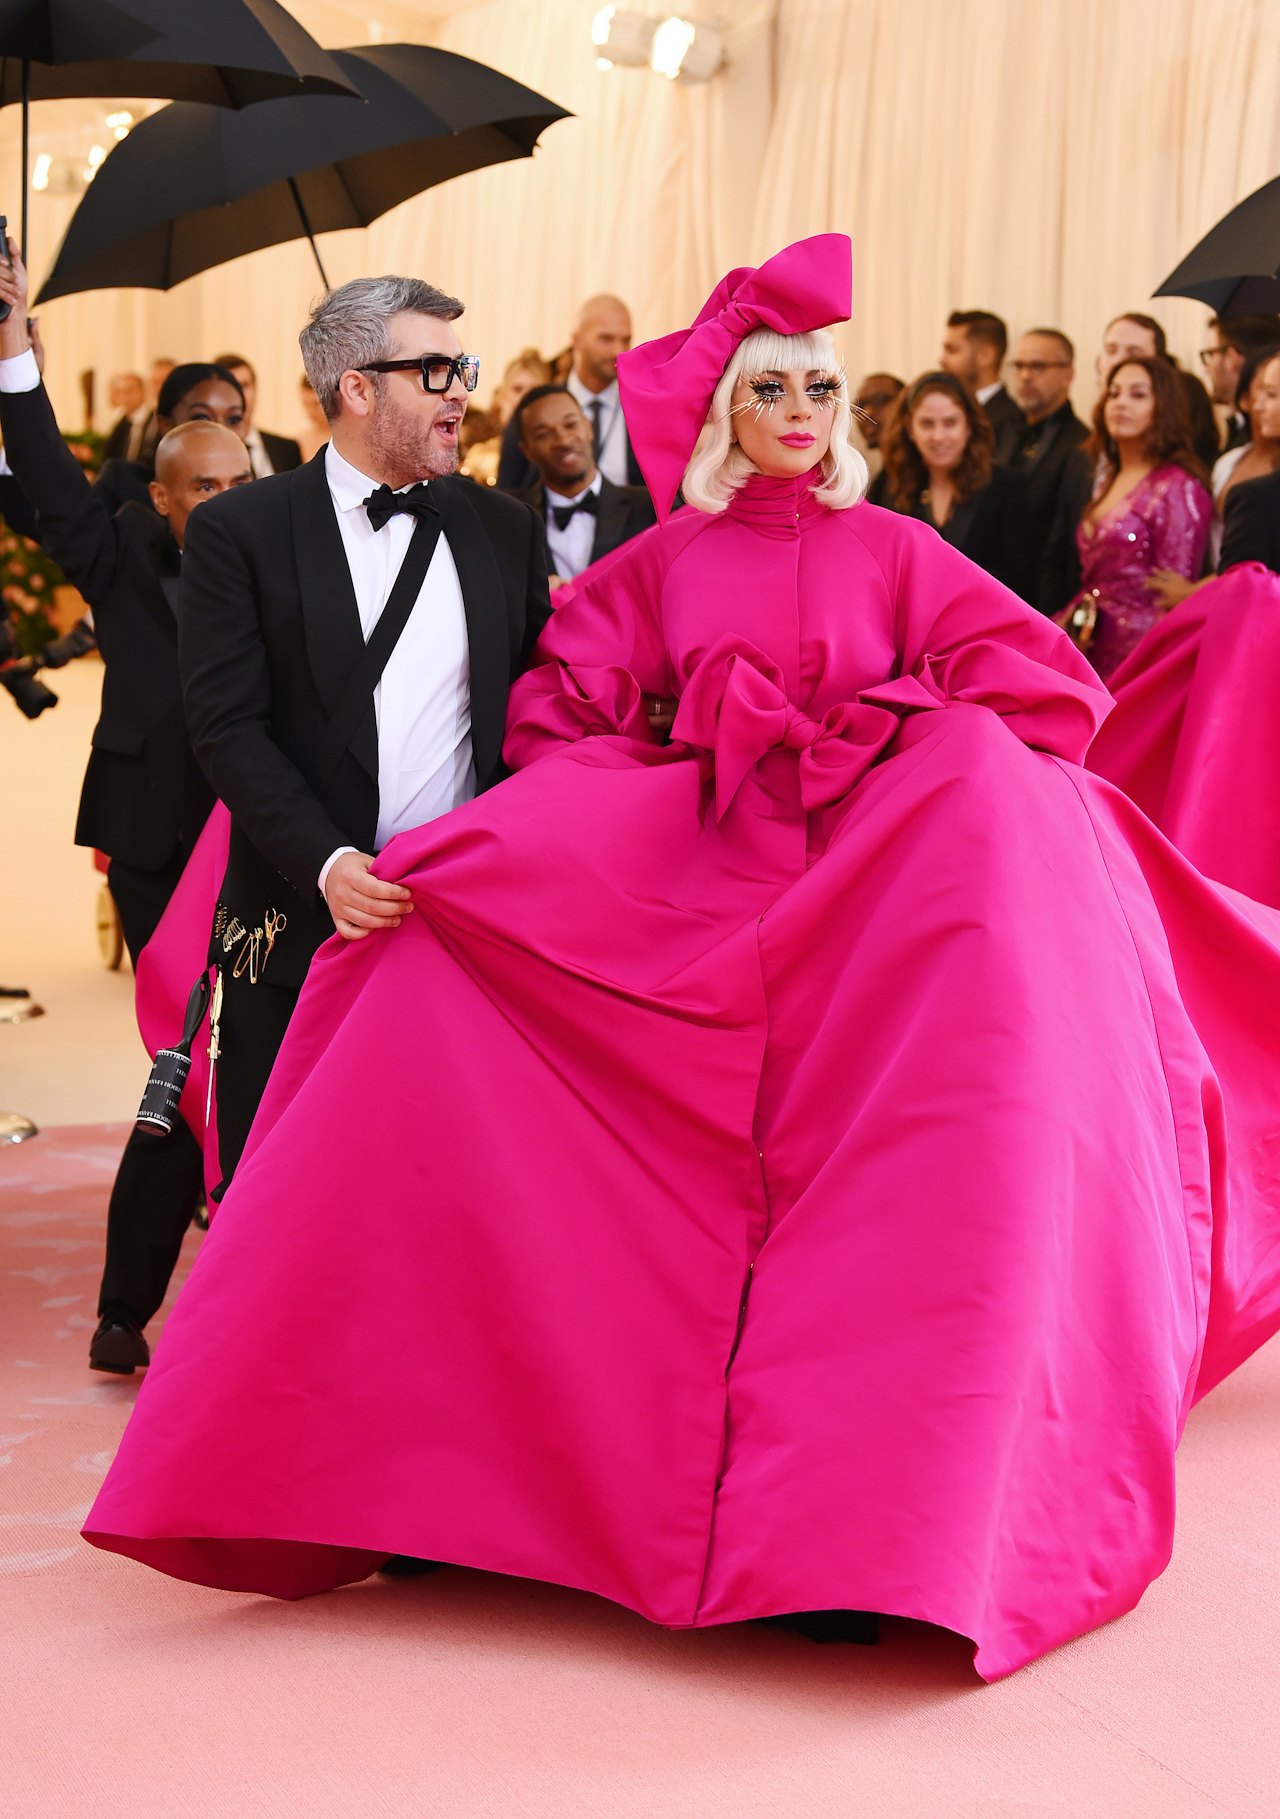 These Pink 2019 Met Gala Outfits Nailed The “Camp” Theme